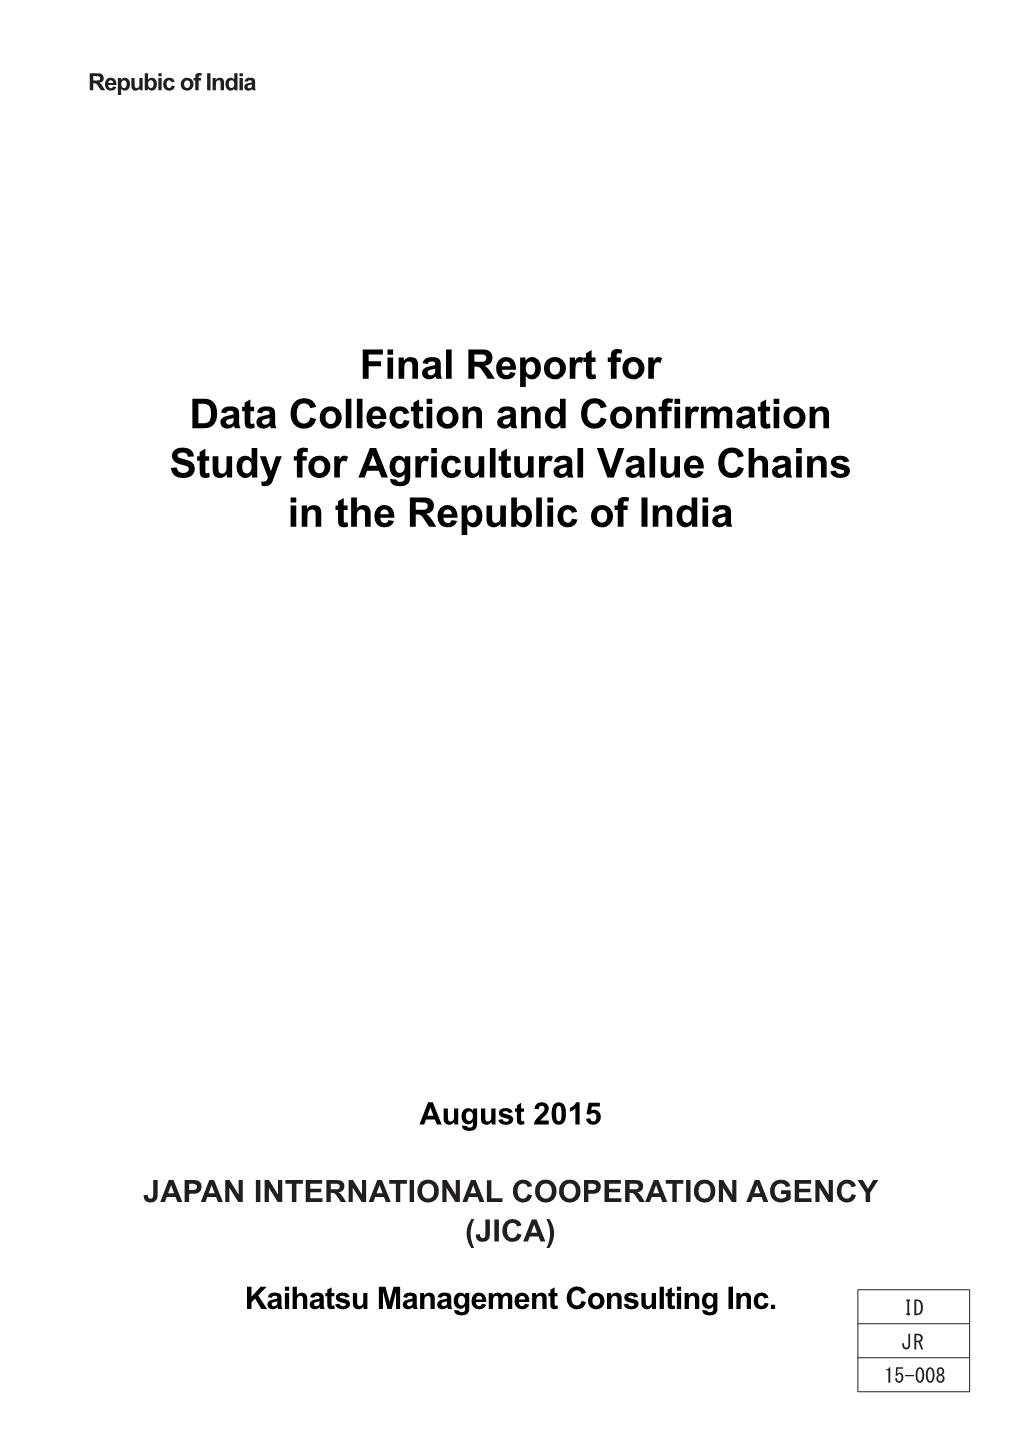 Final Report for Data Collection and Confirmation Study for Agricultural Value Chains in the Republic of India